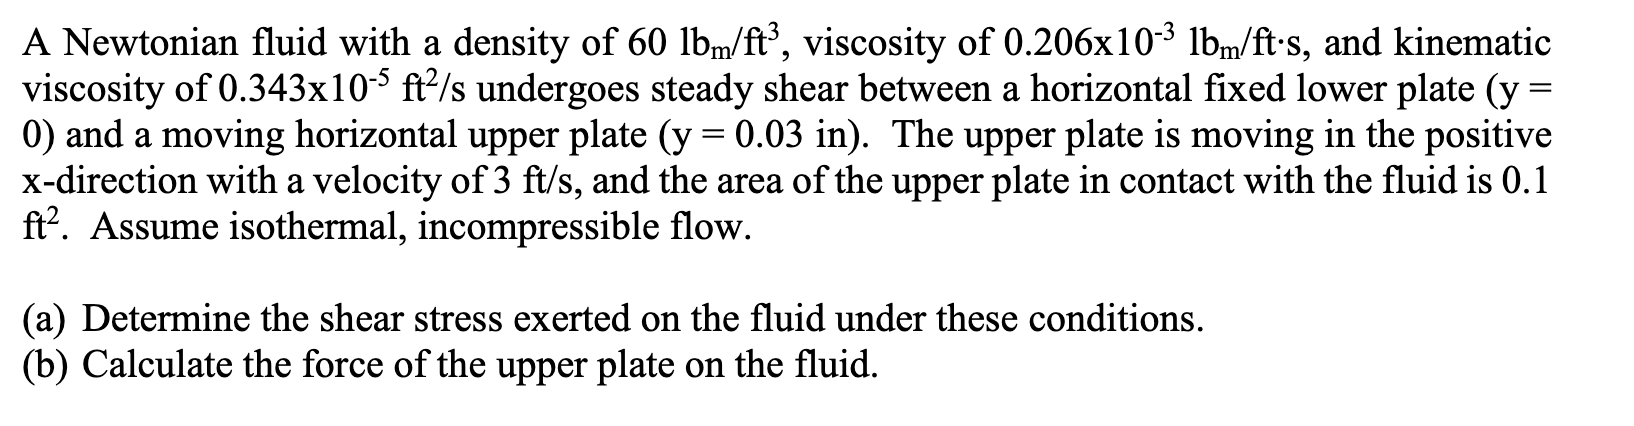 A Newtonian fluid with a density of 60 lbm/ft³, viscosity of 0.206x10³ lbm/ft•s, and kinematic
viscosity of 0.343x10-$ ft?/s undergoes steady shear between a horizontal fixed lower plate (y =
0) and a moving horizontal upper plate (y = 0.03 in). The upper plate is moving in the positive
x-direction with a velocity of 3 ft/s, and the area of the upper plate in contact with the fluid is 0.1
ft?. Assume isothermal, incompressible flow.
(a) Determine the shear stress exerted on the fluid under these conditions.
(b) Calculate the force of the upper plate on the fluid.
